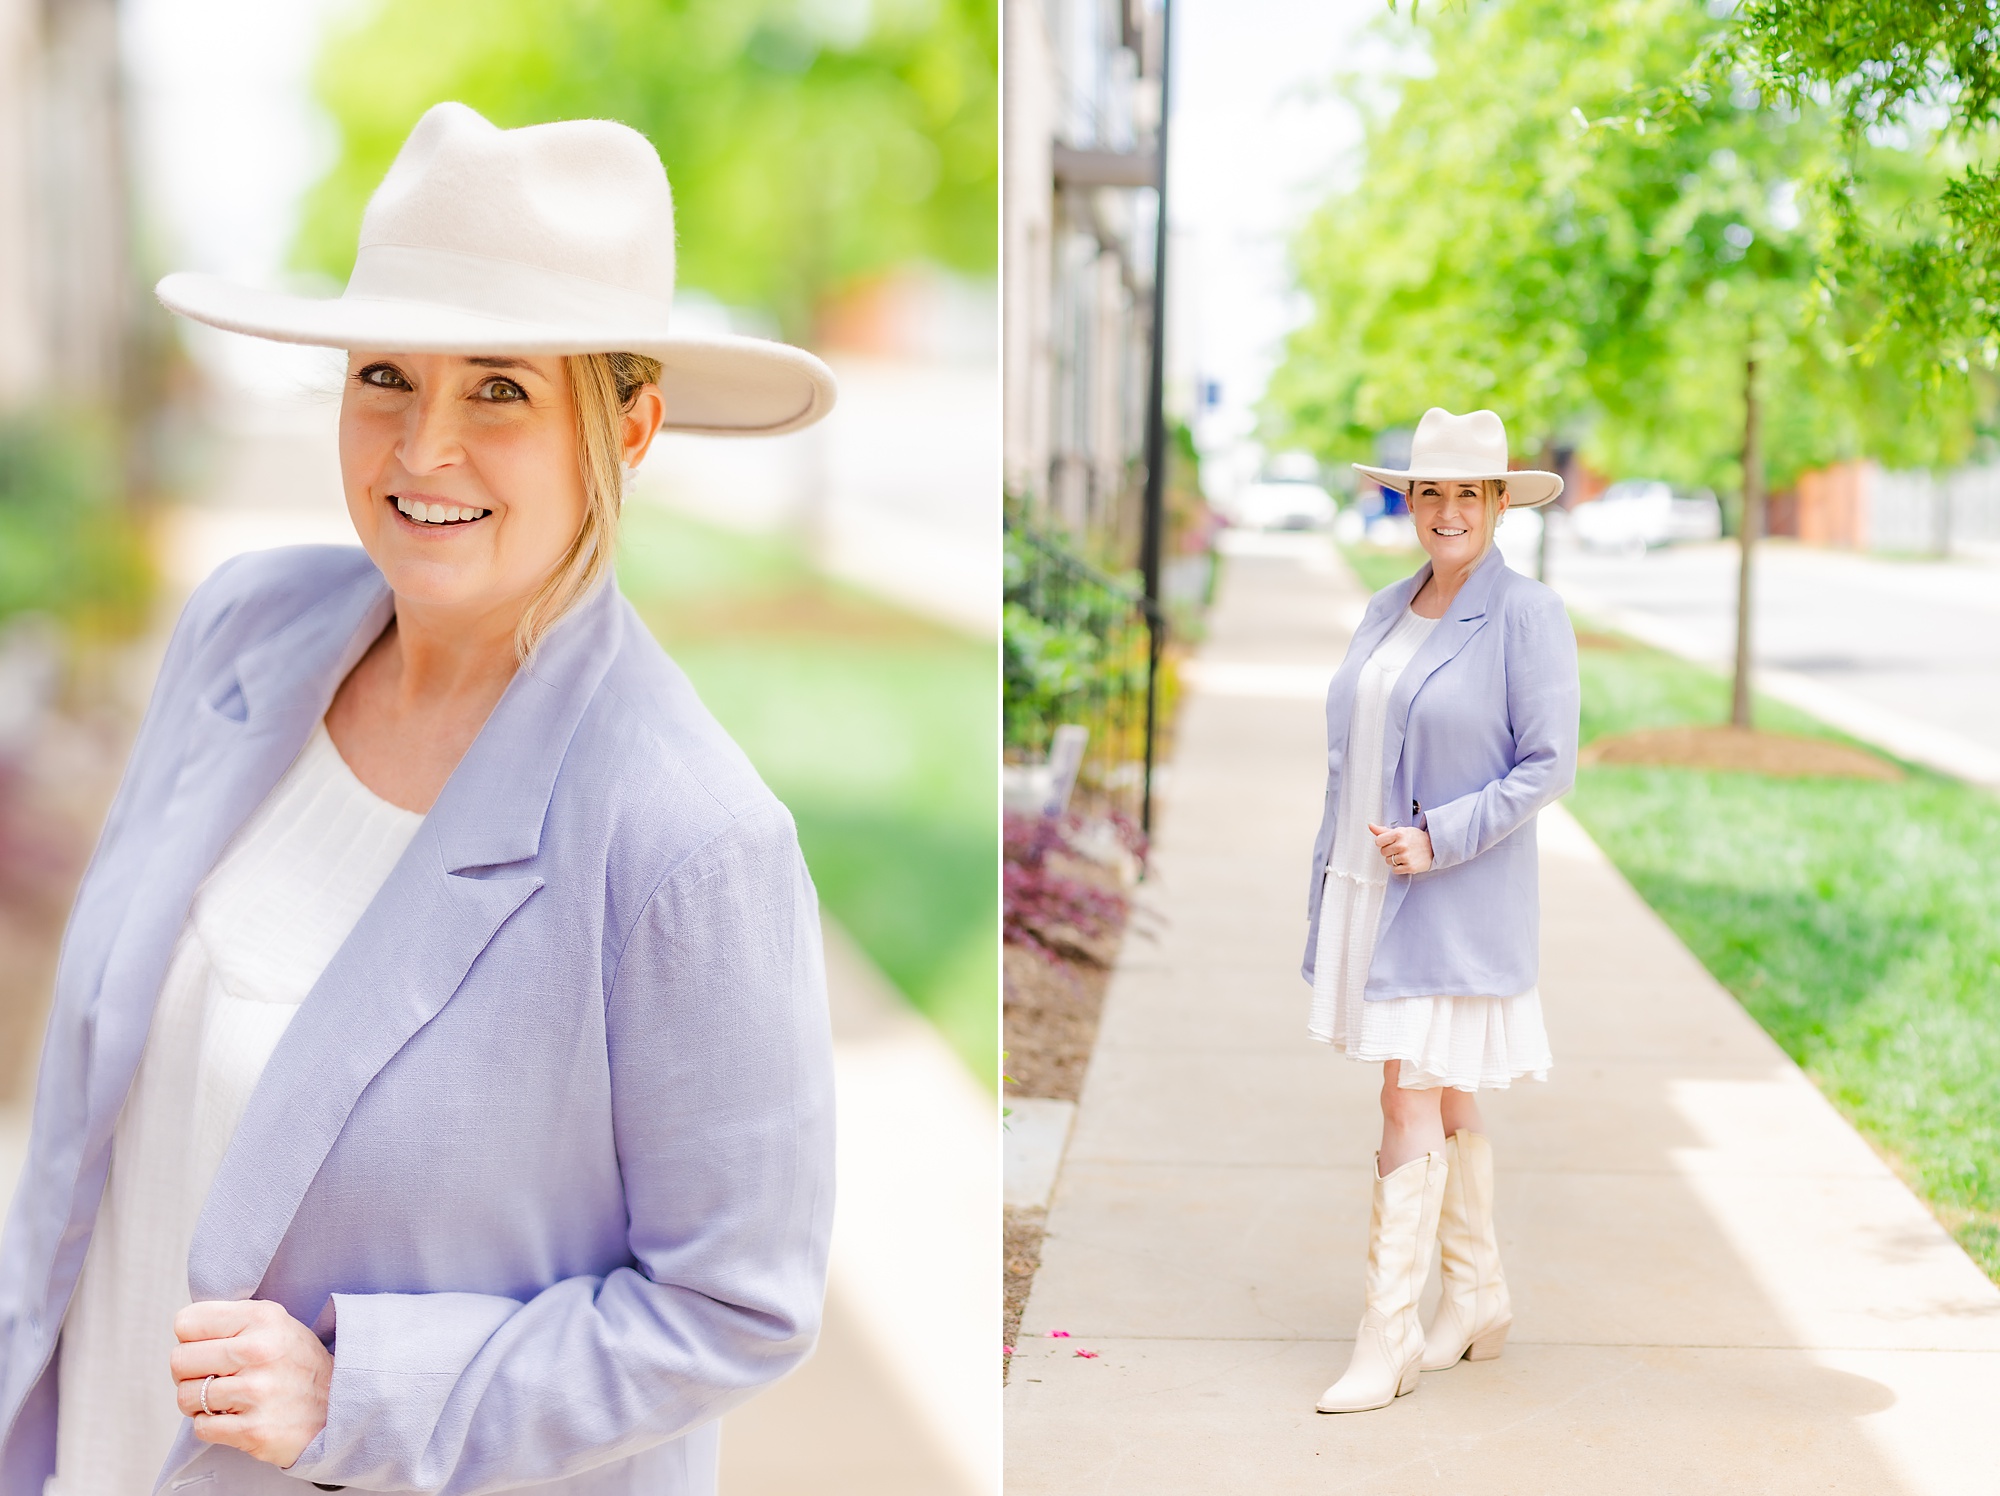 woman in purple jacket and white hat poses on sidewalk